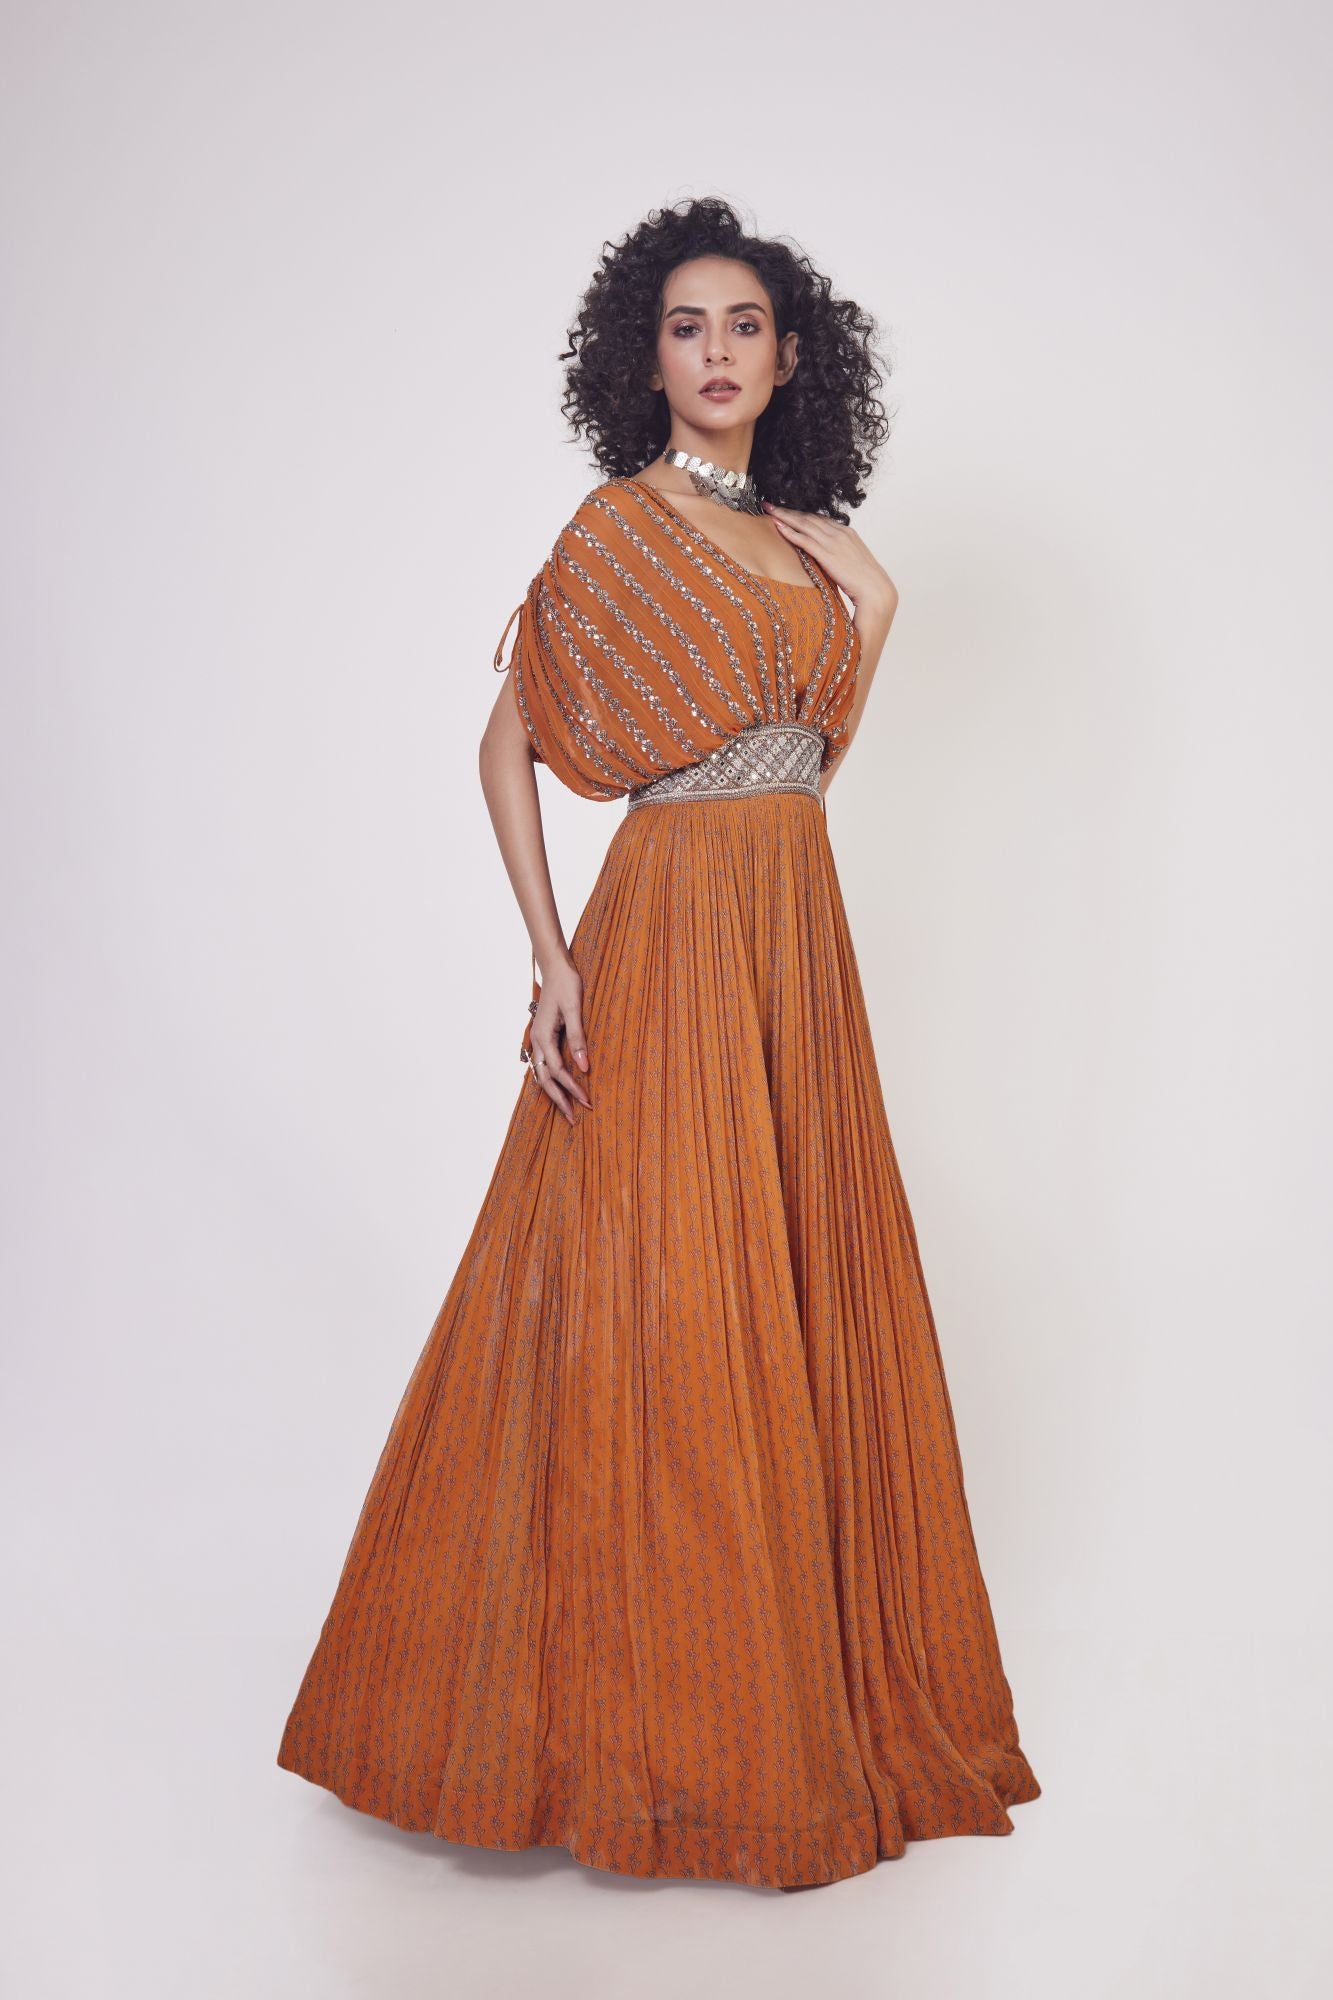 Buy orange sequin work georgette gown online in USA. Shop the best and latest designs in embroidered sarees, designer sarees, Anarkali suit, lehengas, sharara suits for weddings and special occasions from Pure Elegance Indian fashion store in USA.-side